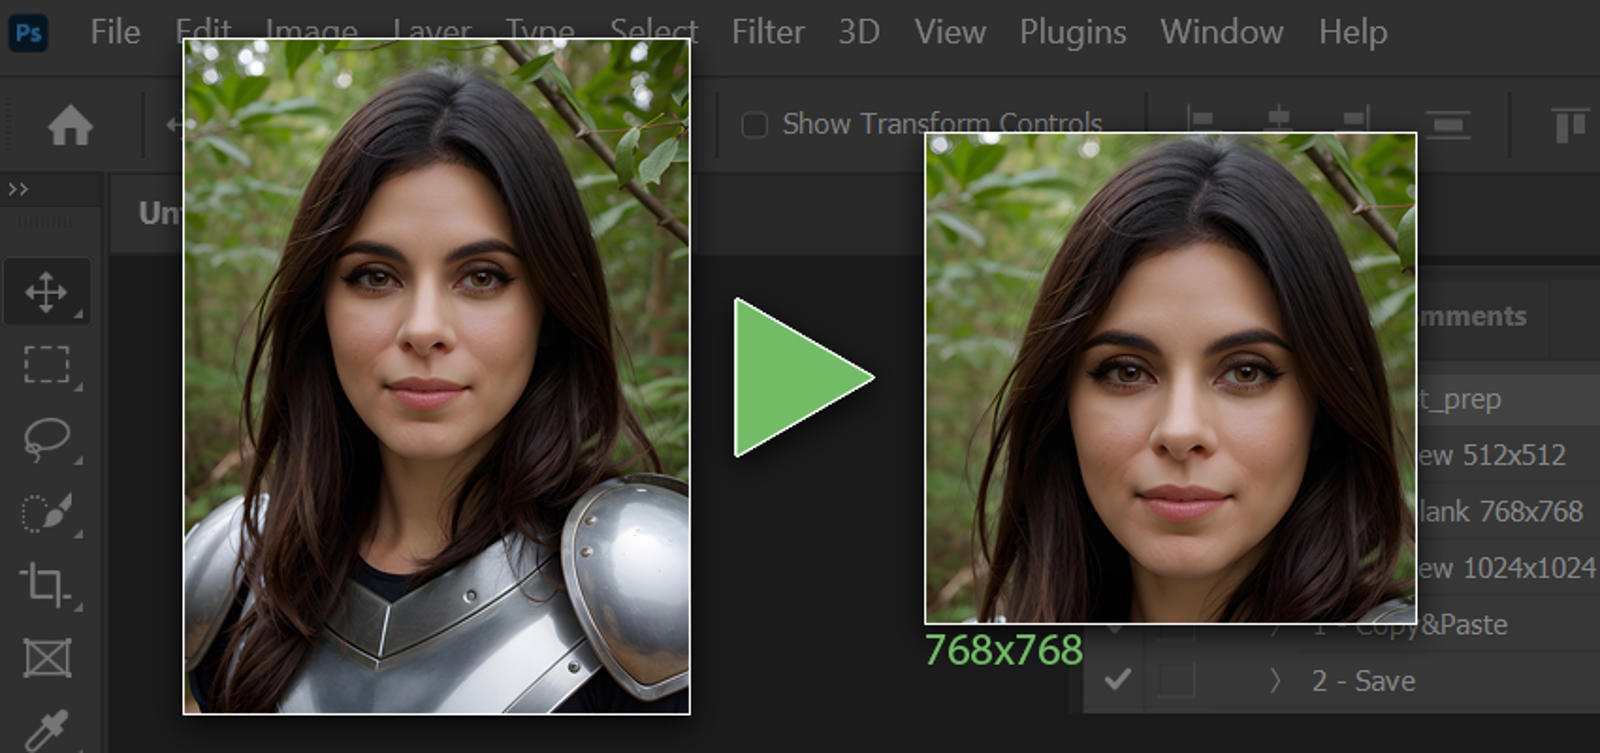 Faster image editing (Photoshop workflow)